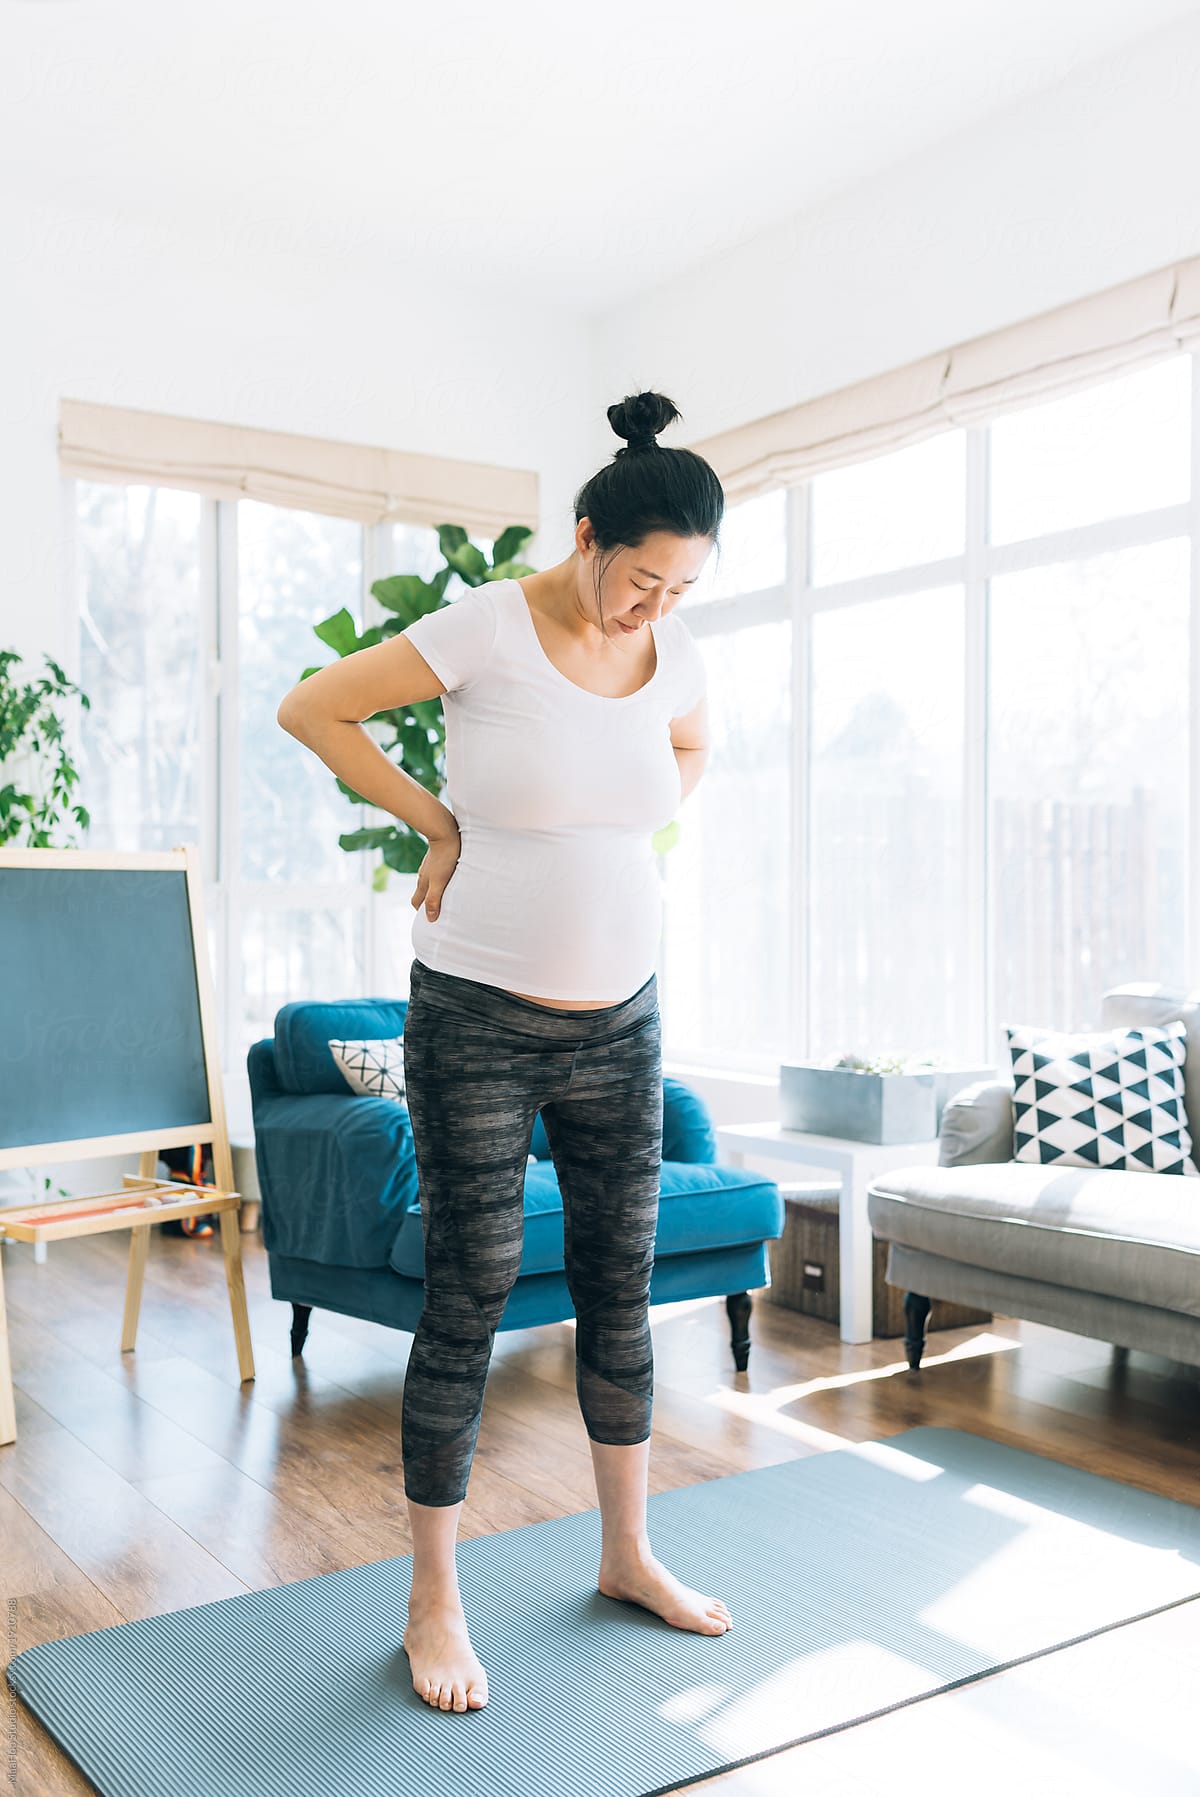 Pregnant Woman At Home By Stocksy Contributor Maahoo Stocksy